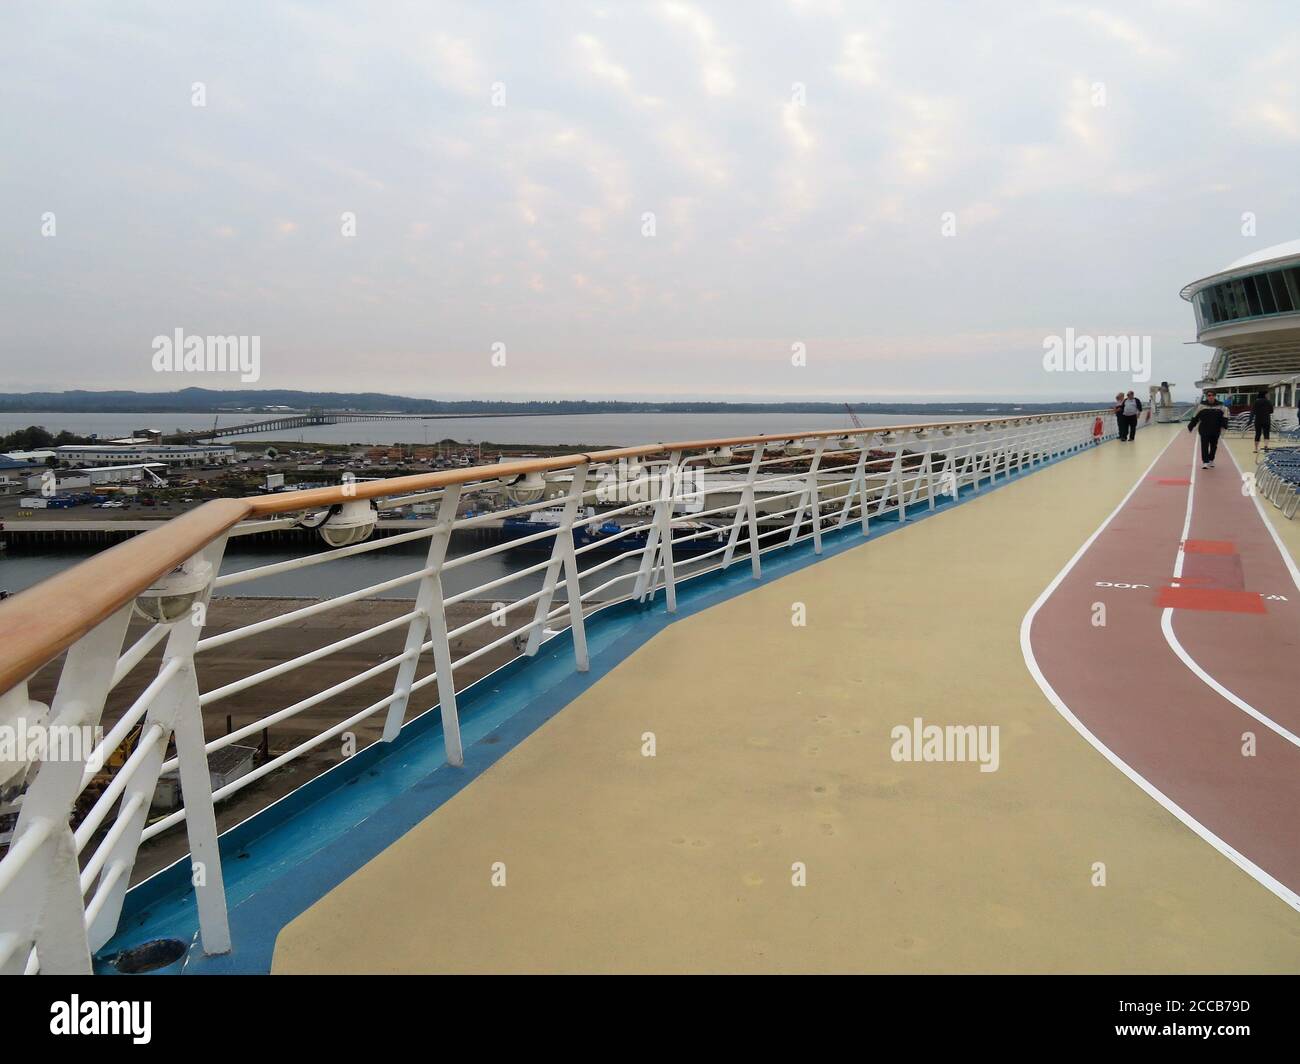 Cruise ship deck and railing Stock Photo